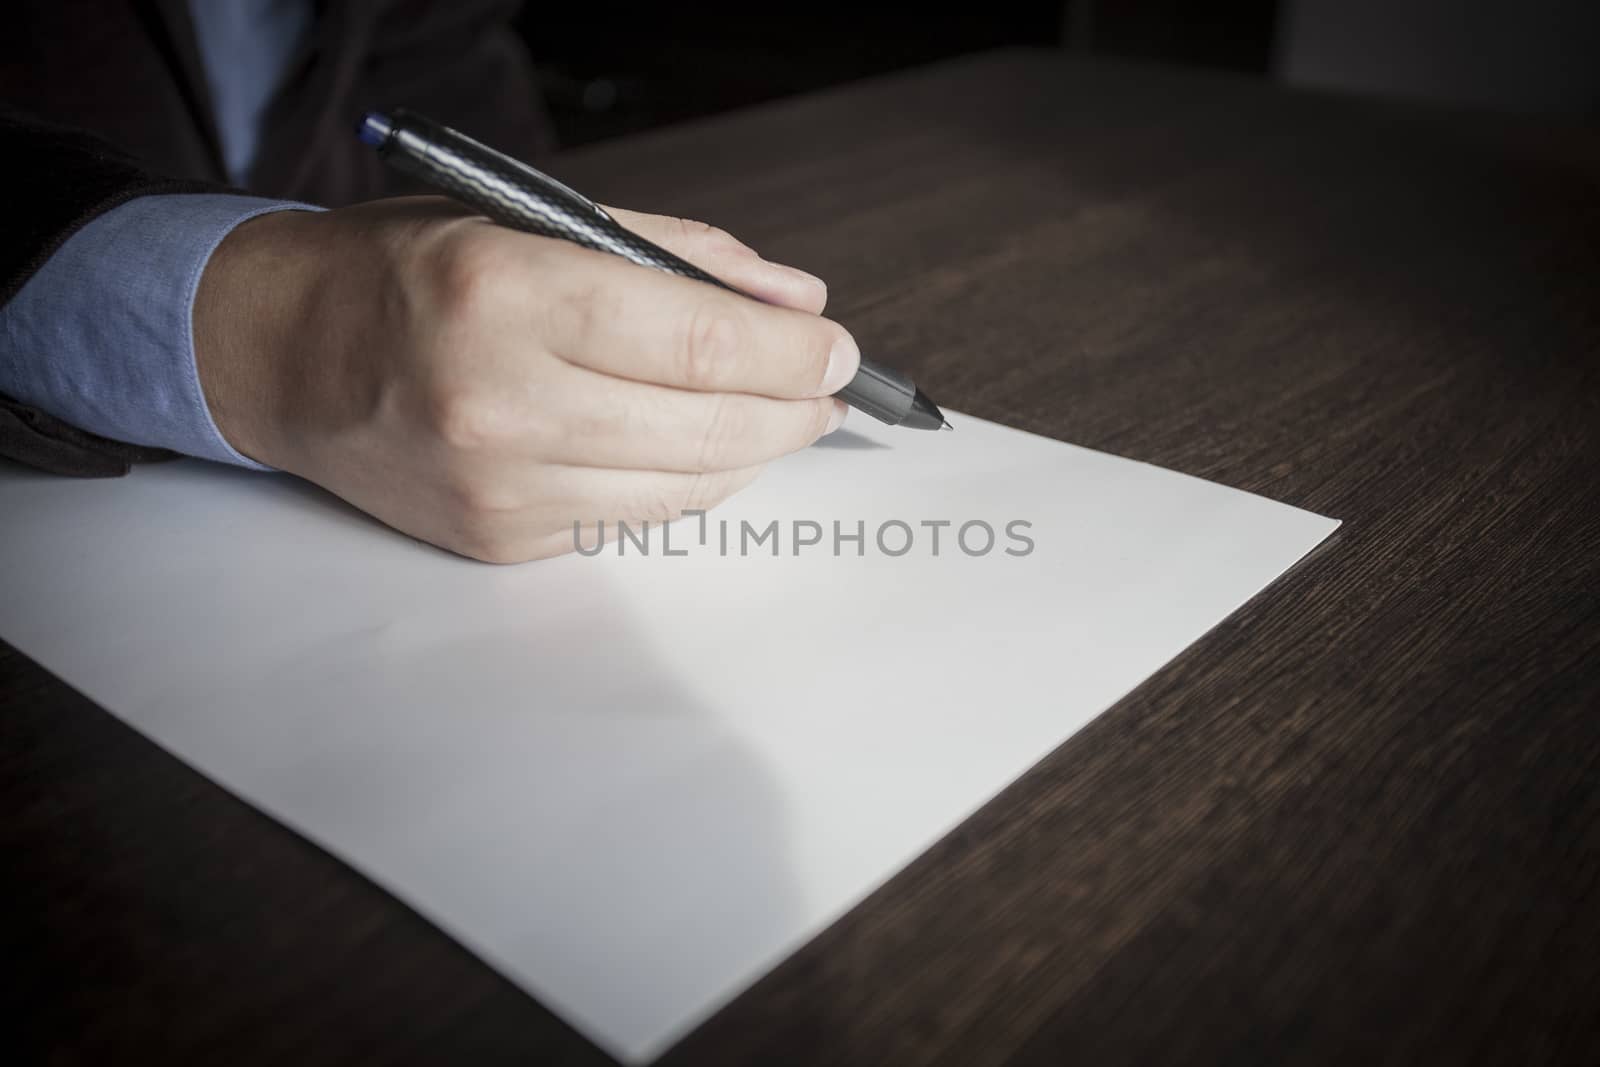 Man's hands keep the handle in a business suit over a sheet of paper